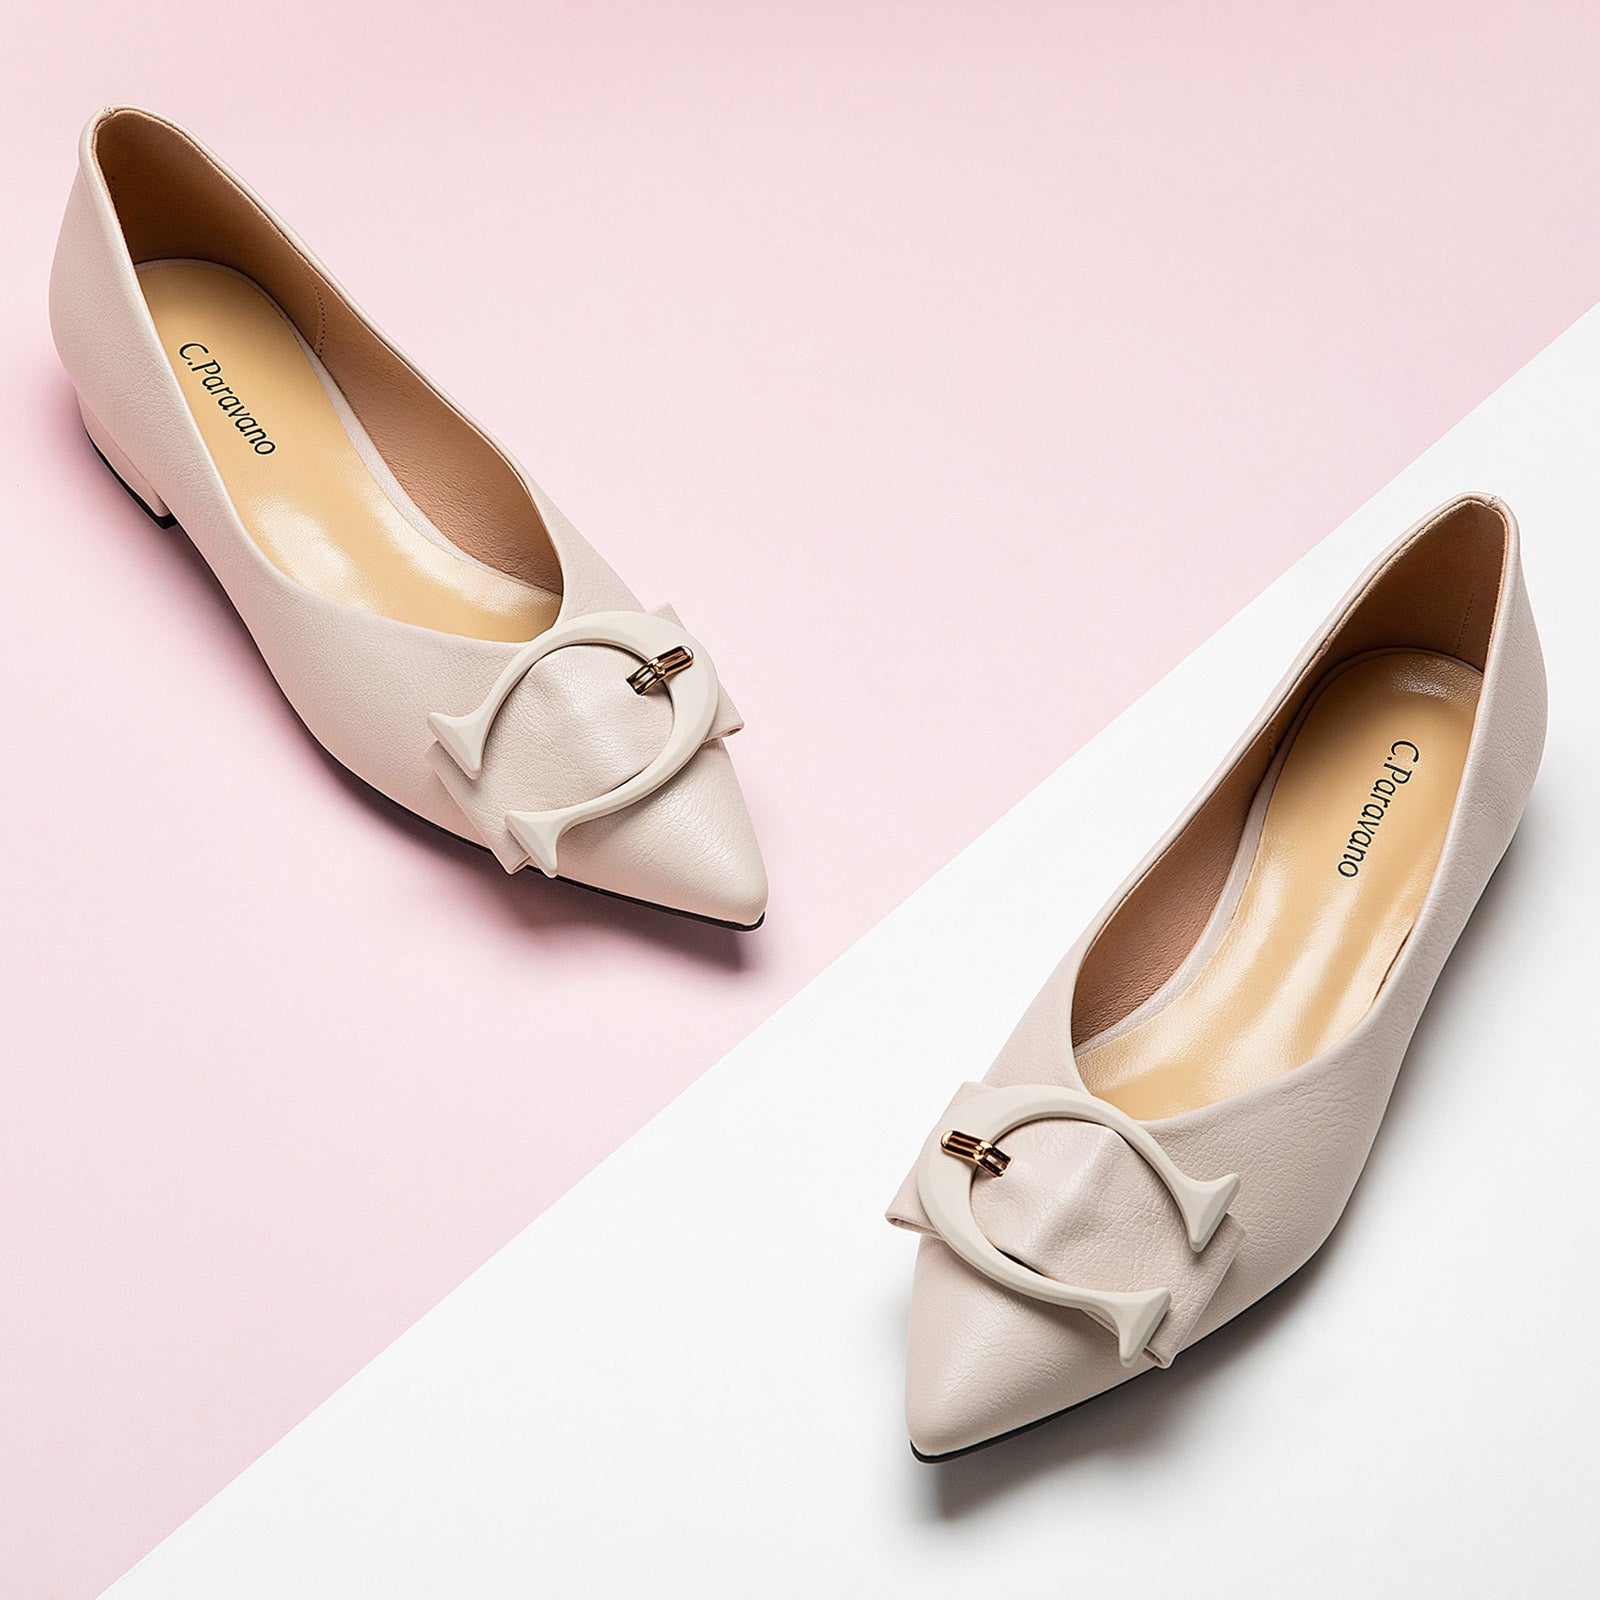 White Point Toe Flats featuring grain leather, a timeless and elegant option for any occasion